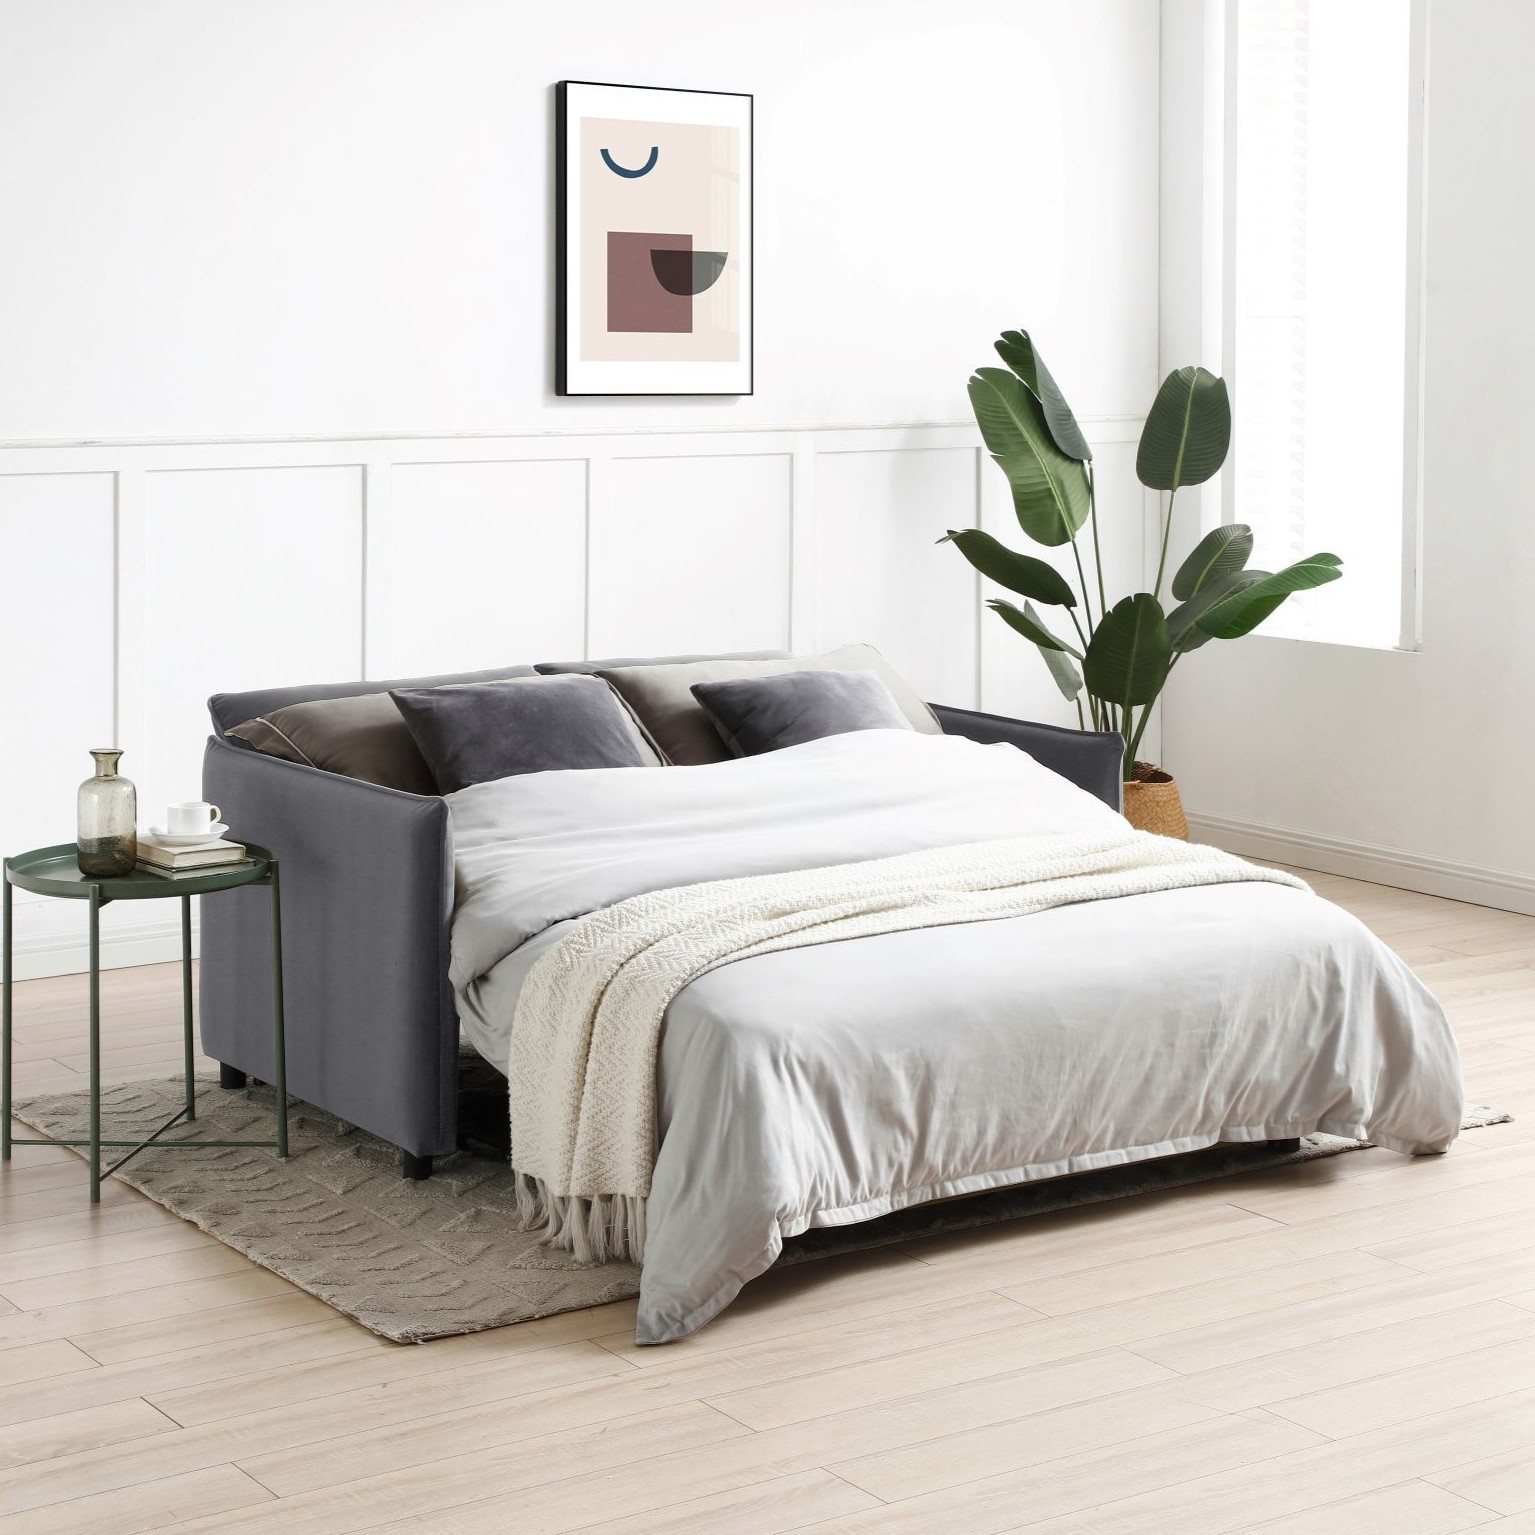 where-to-buy-a-sofa-bed